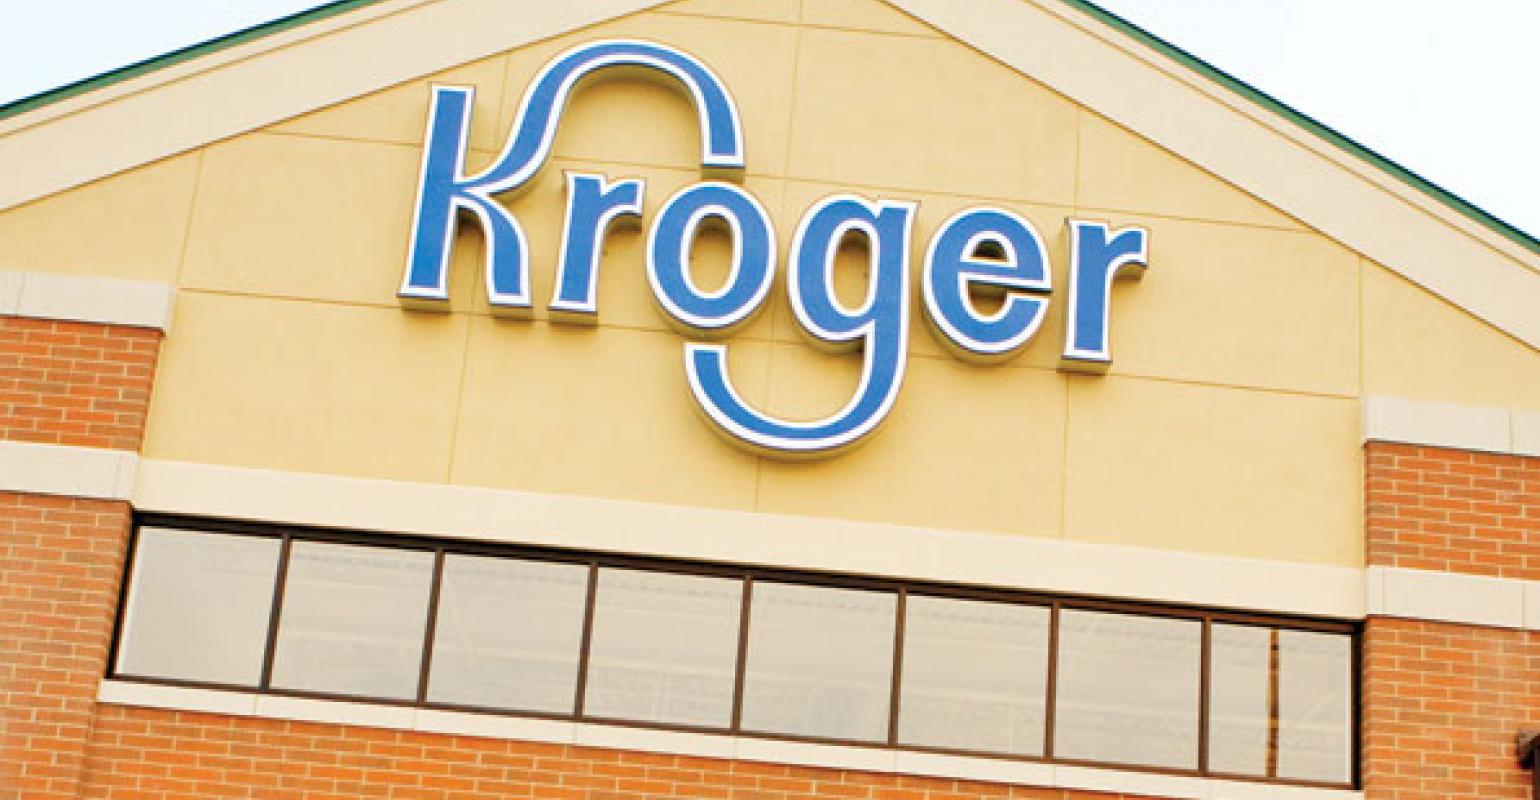 Kroger Doctrine Is Changing the Channel | Supermarket News